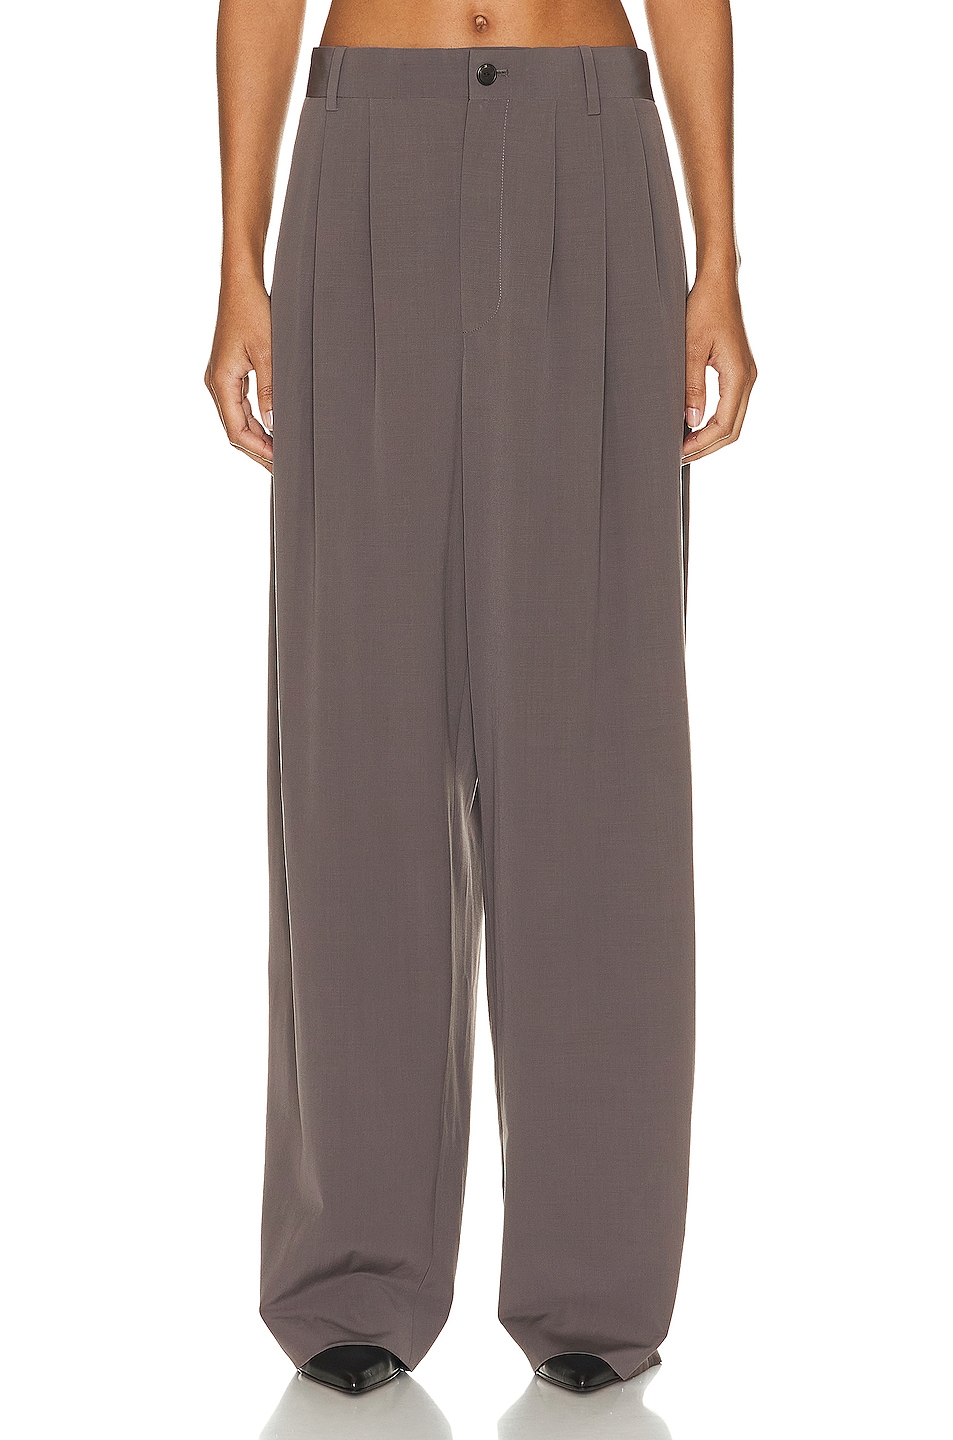 Image 1 of The Row Rufus Pant in Dove Grey